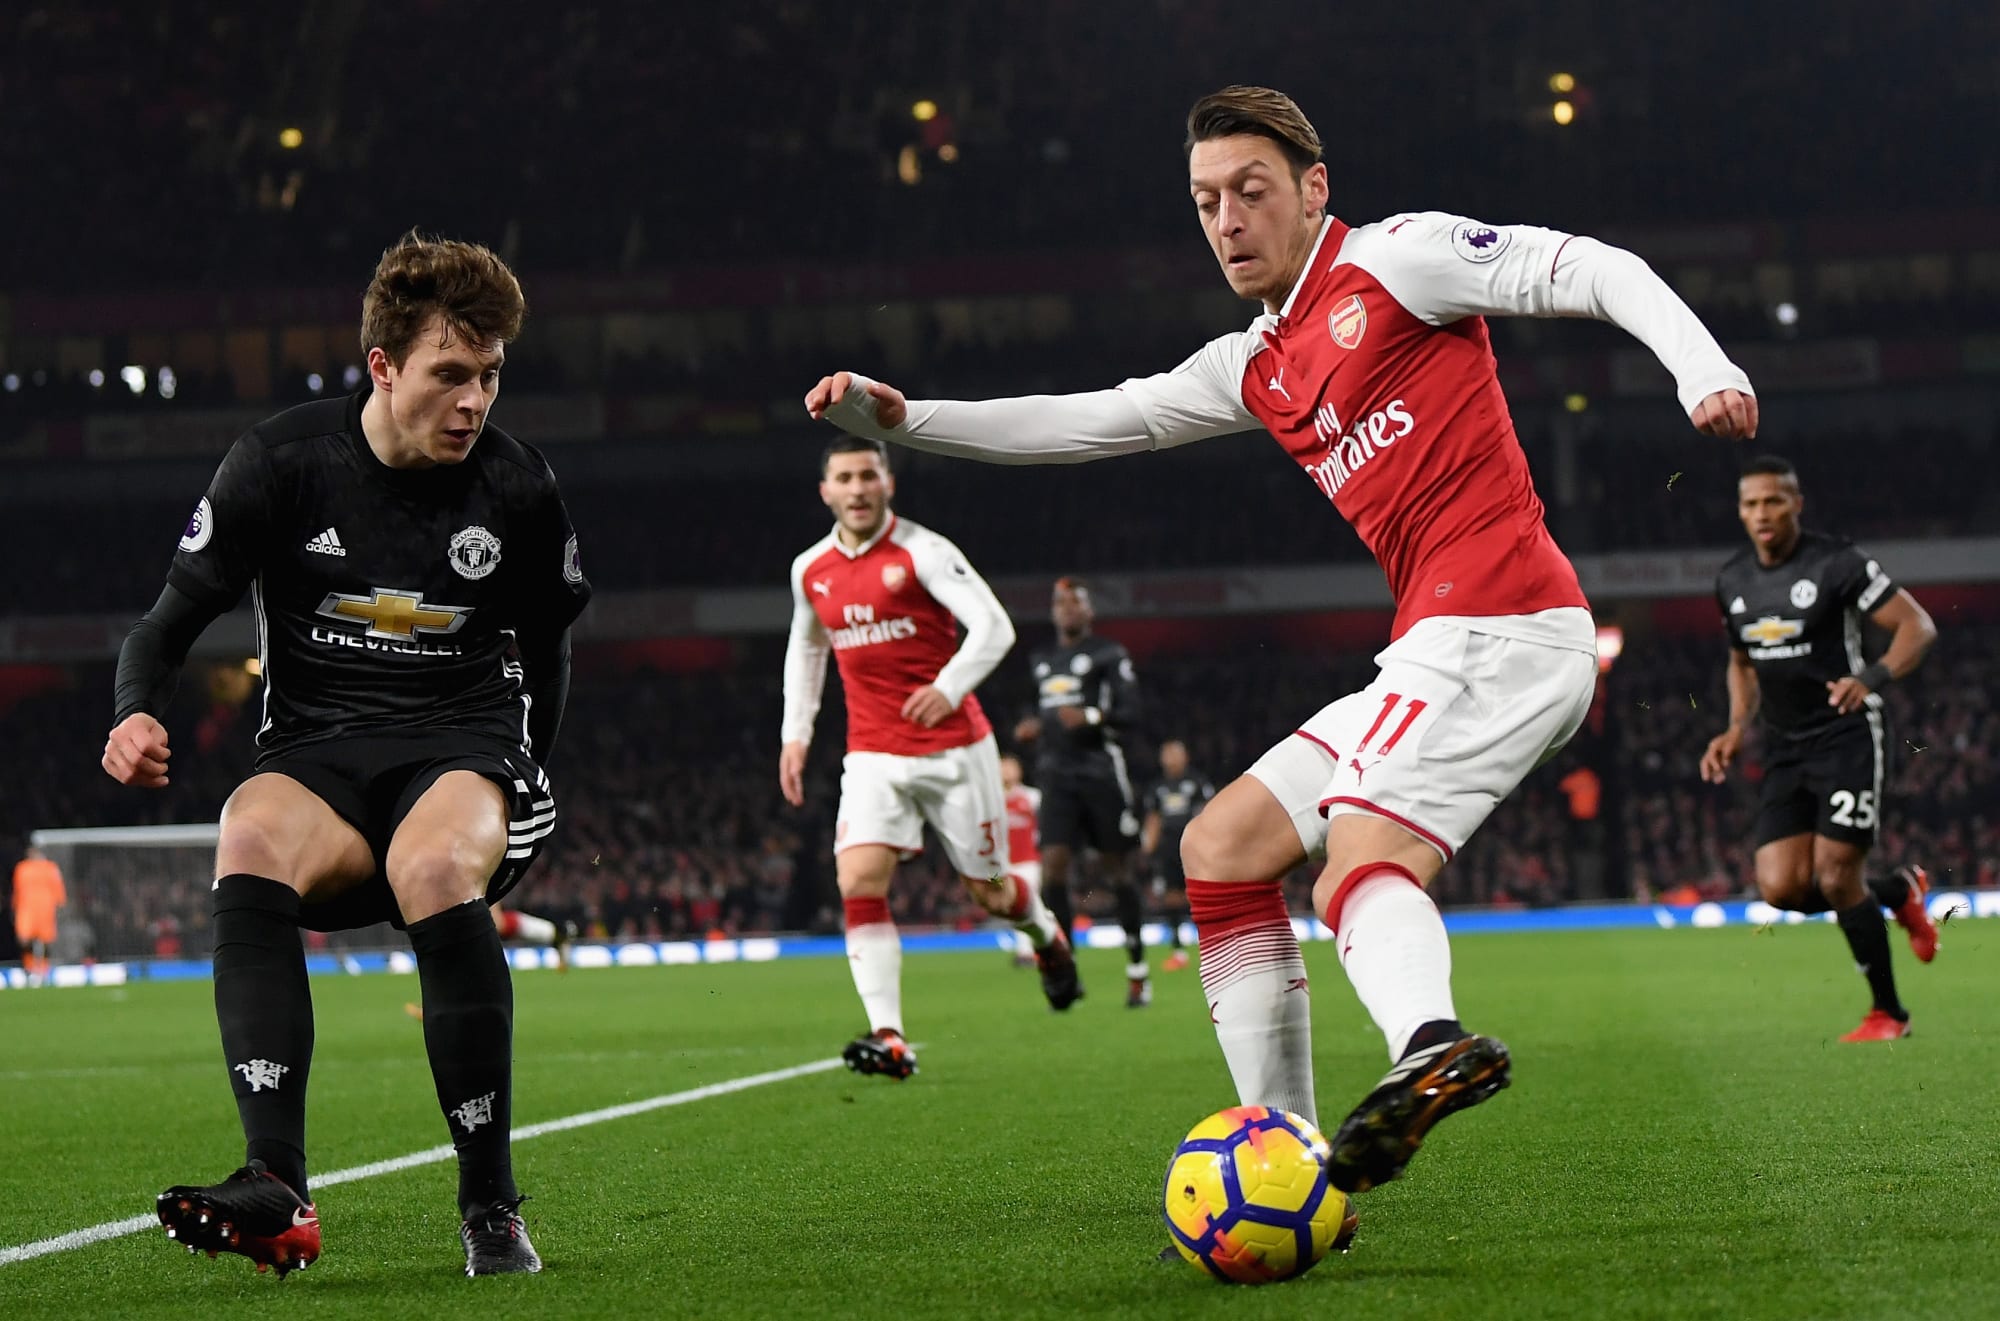 Arsenal Vs Manchester United: Unconventionally, Aaron Ramsey and Mesut